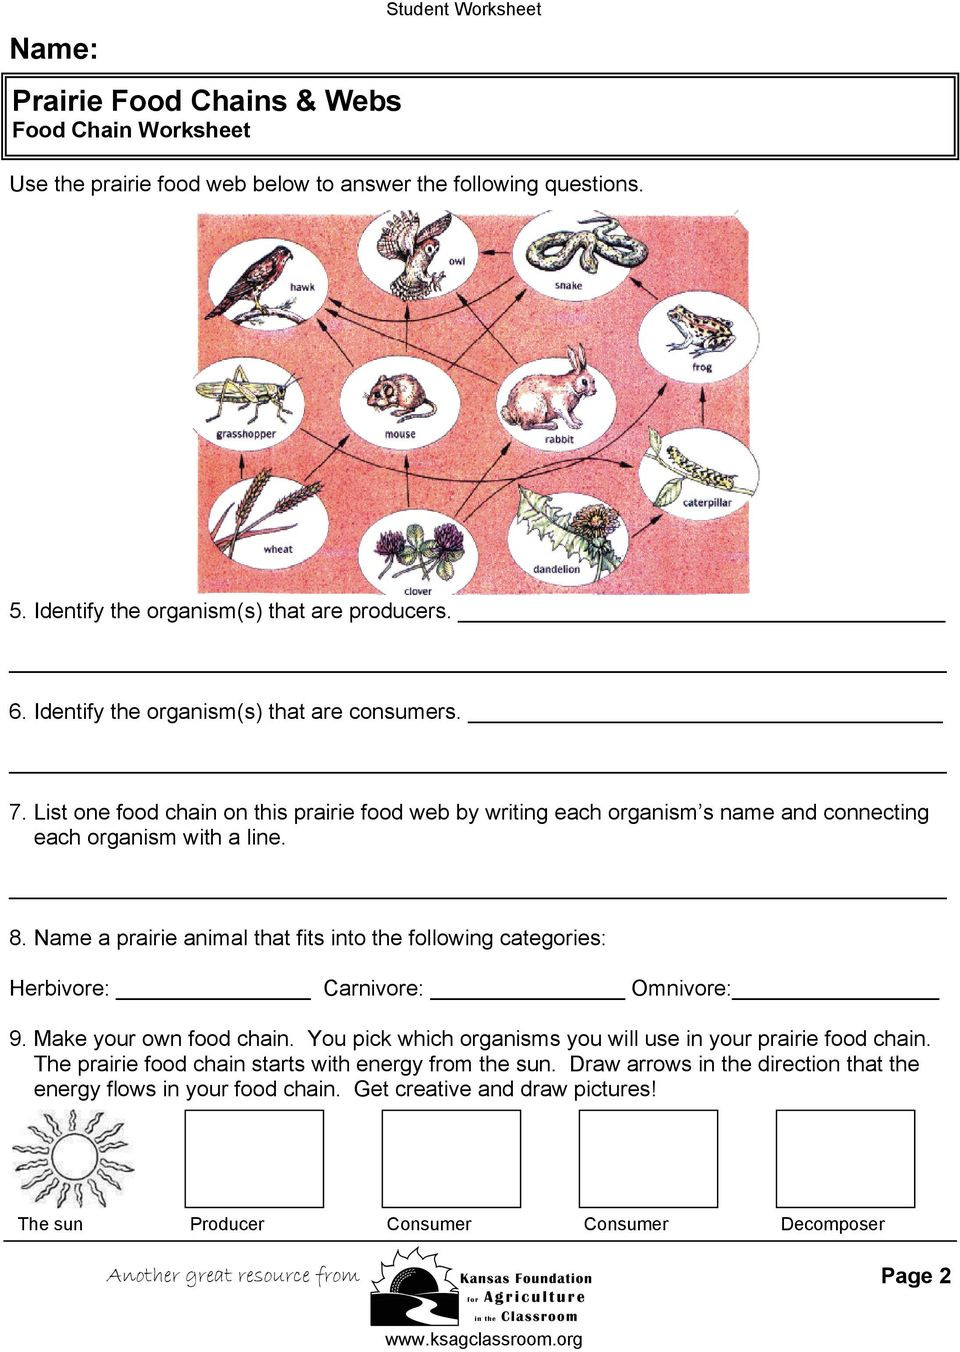 Food Chains and Webs Worksheet Prairie Food Chains &amp; Webs Producers Consumers